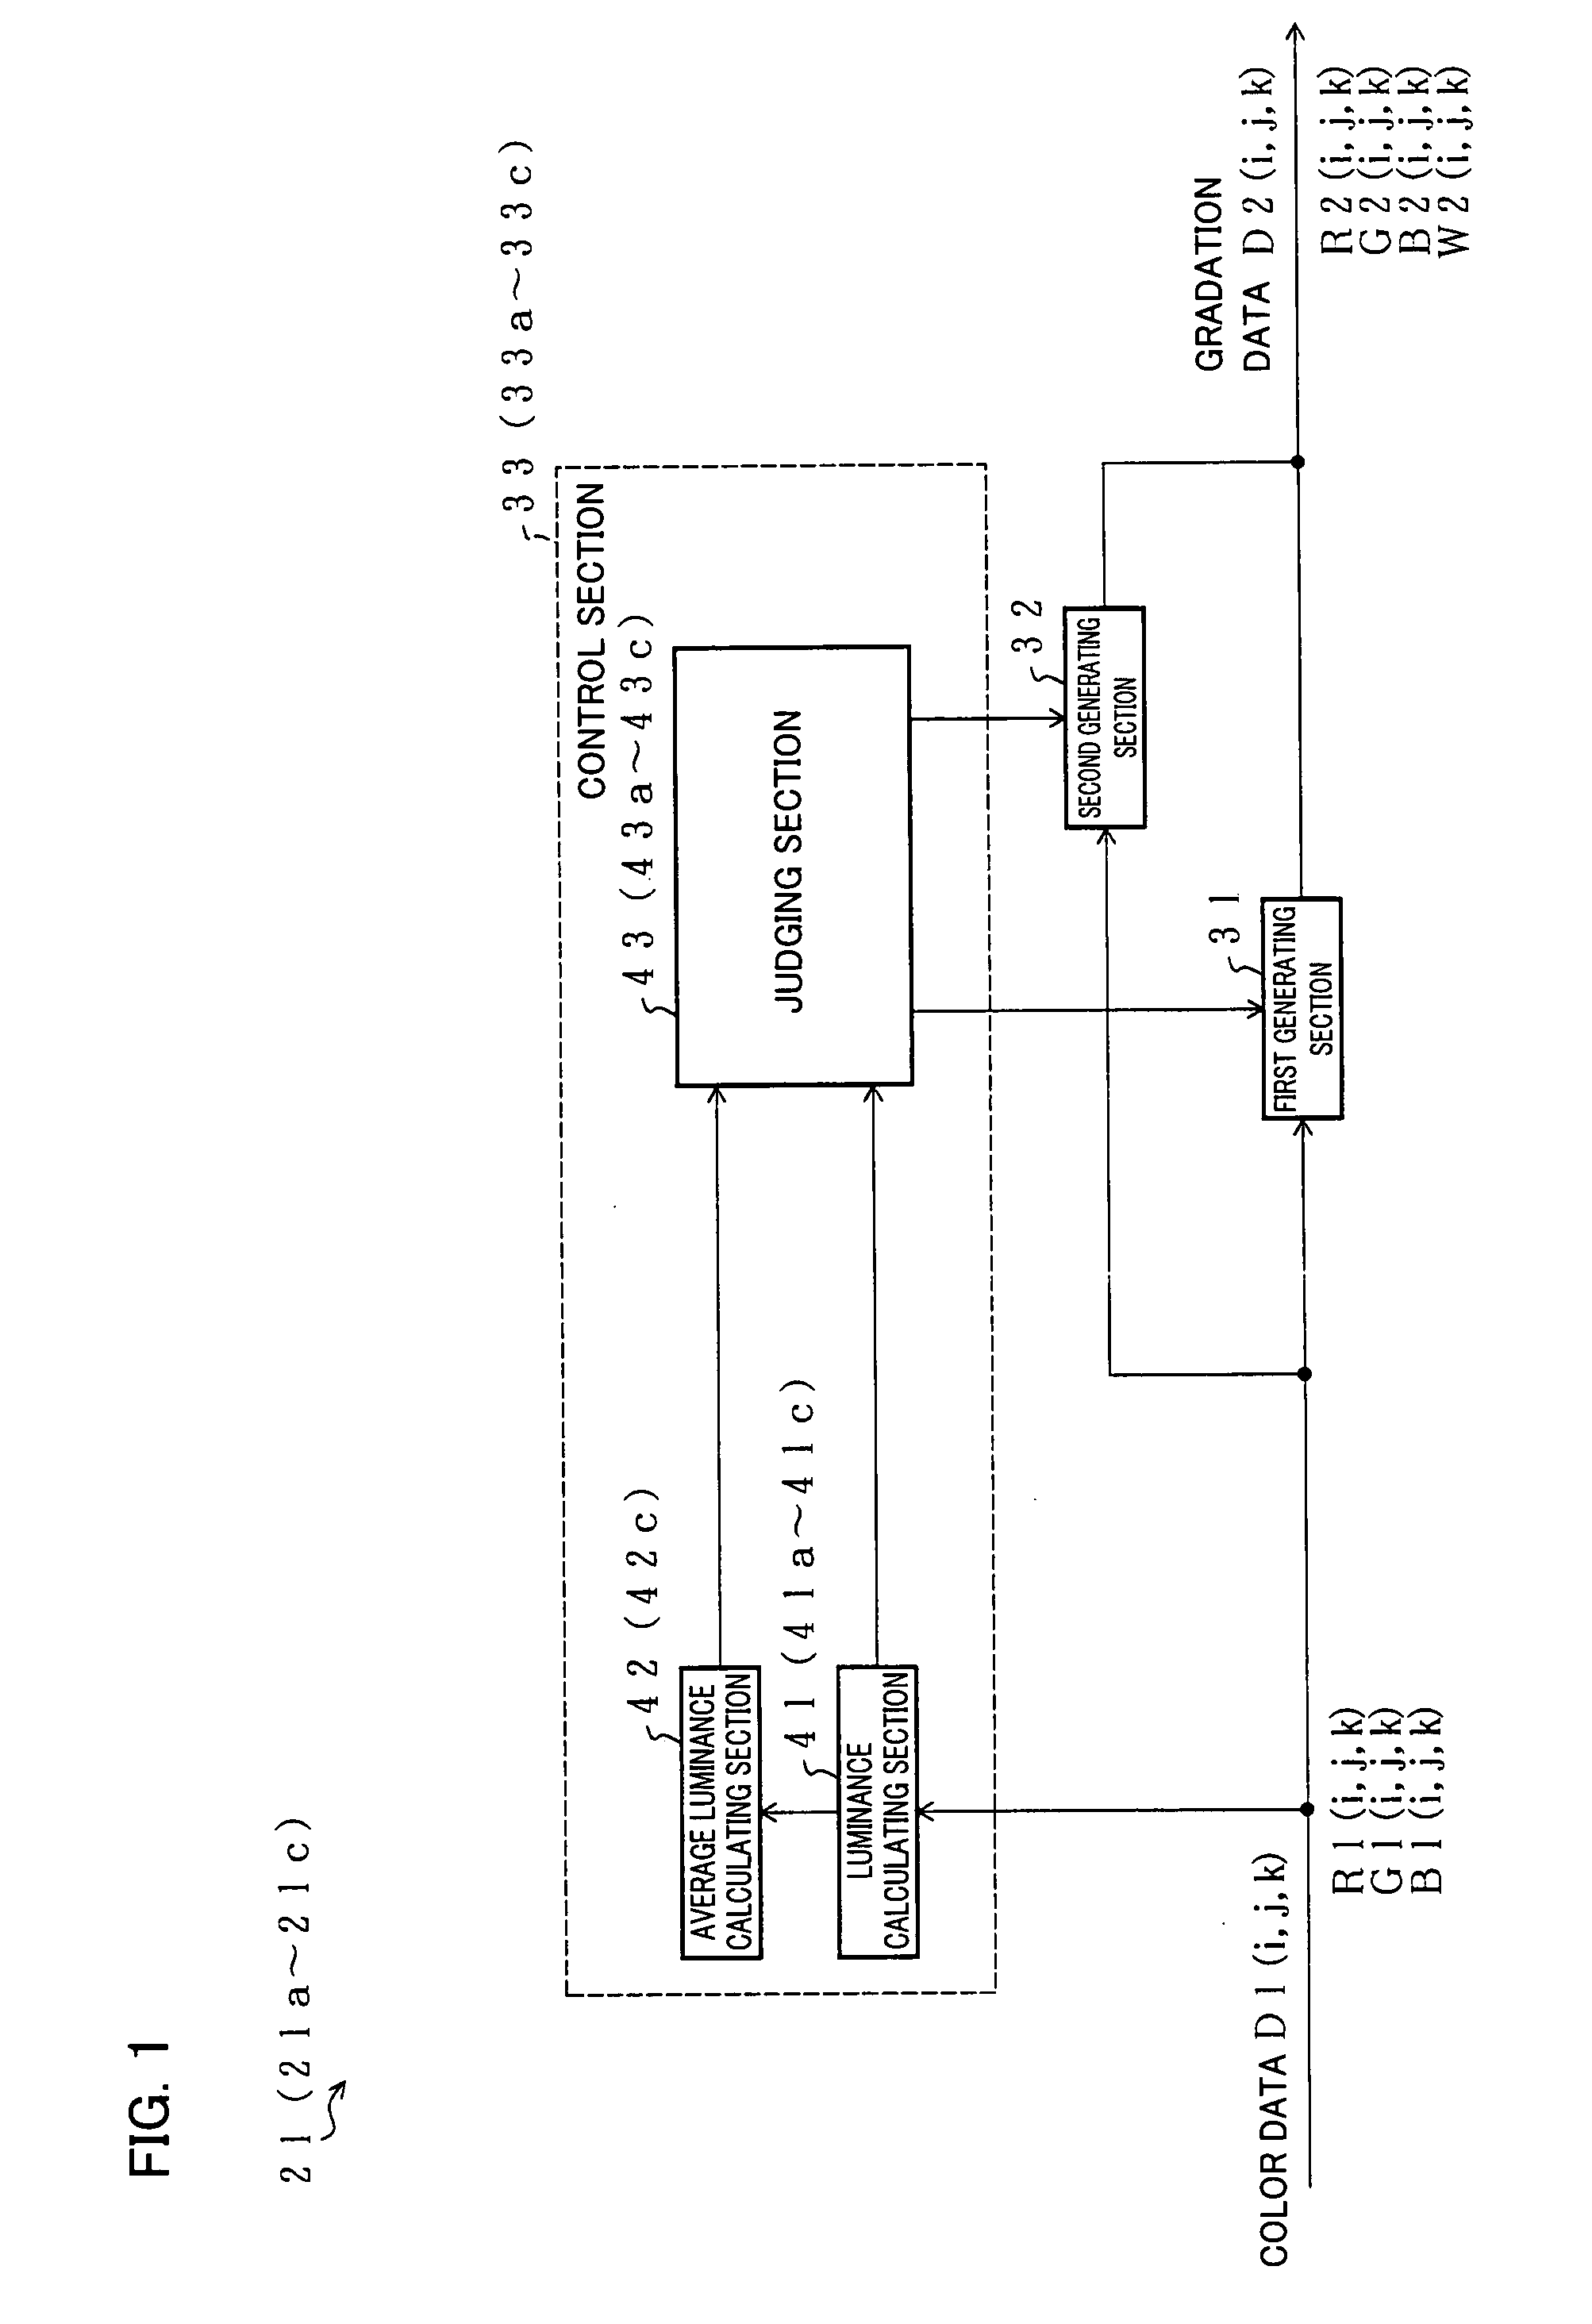 Display Apparatus Driving Method, Display Apparatus Driving Device, Program Therefor, Recording Medium Storing Program, and Display Apparatus